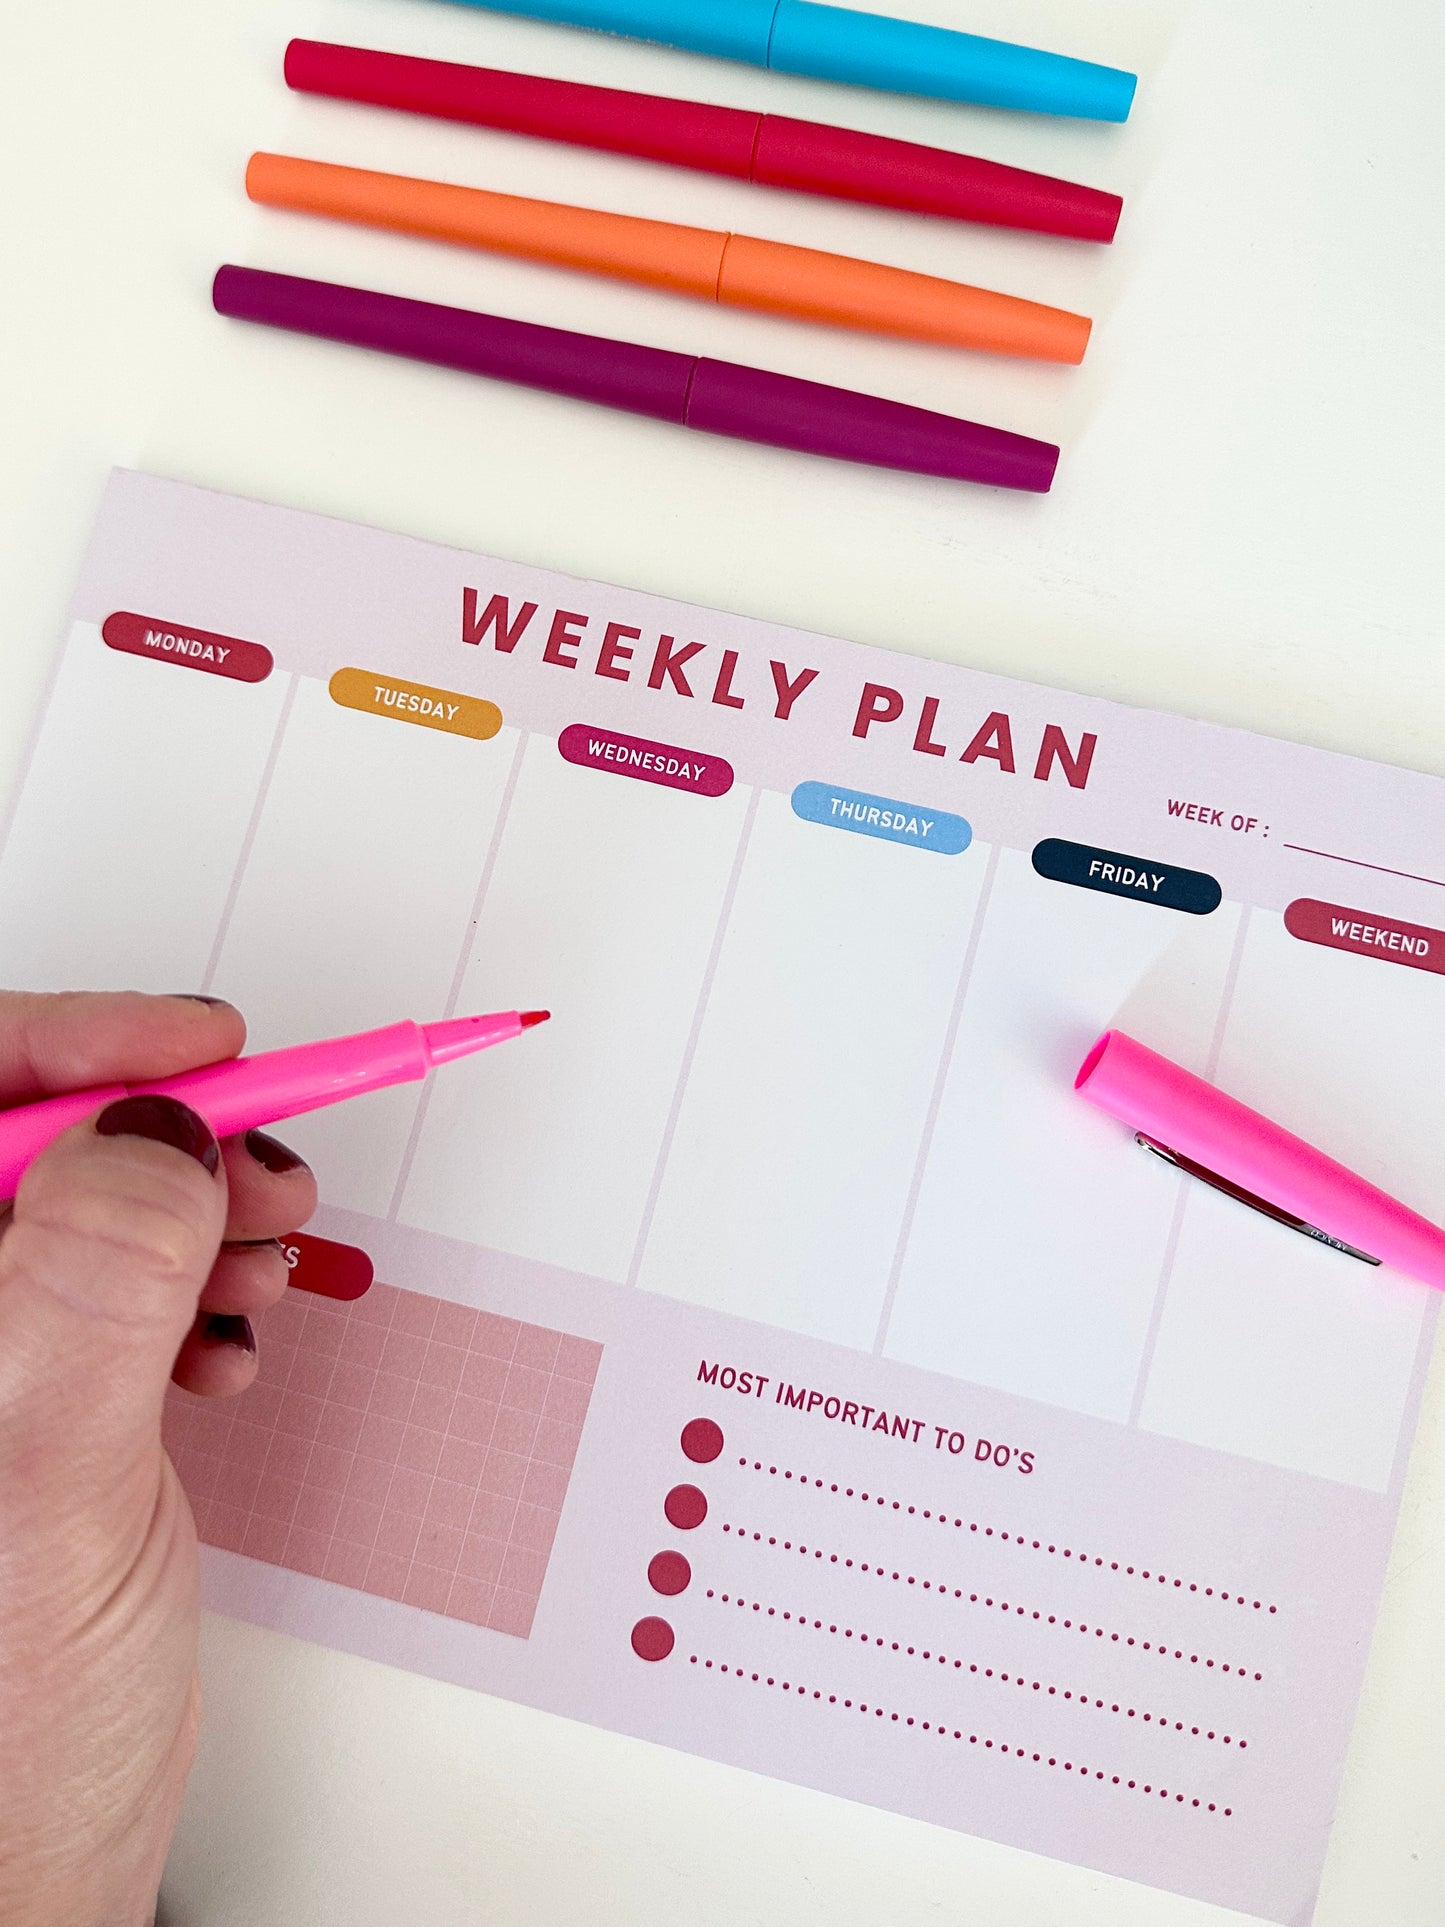 mage of Simple Purposeful Living Weekly Planner Notepad Bundle - Six Notepads for Weekly Planning, Buy 5 Get 1 Free, Free Shipping, Ideal Gift for Teachers, Graduates, Moms. Modern Design, Ample Space, Undated Calendar System.